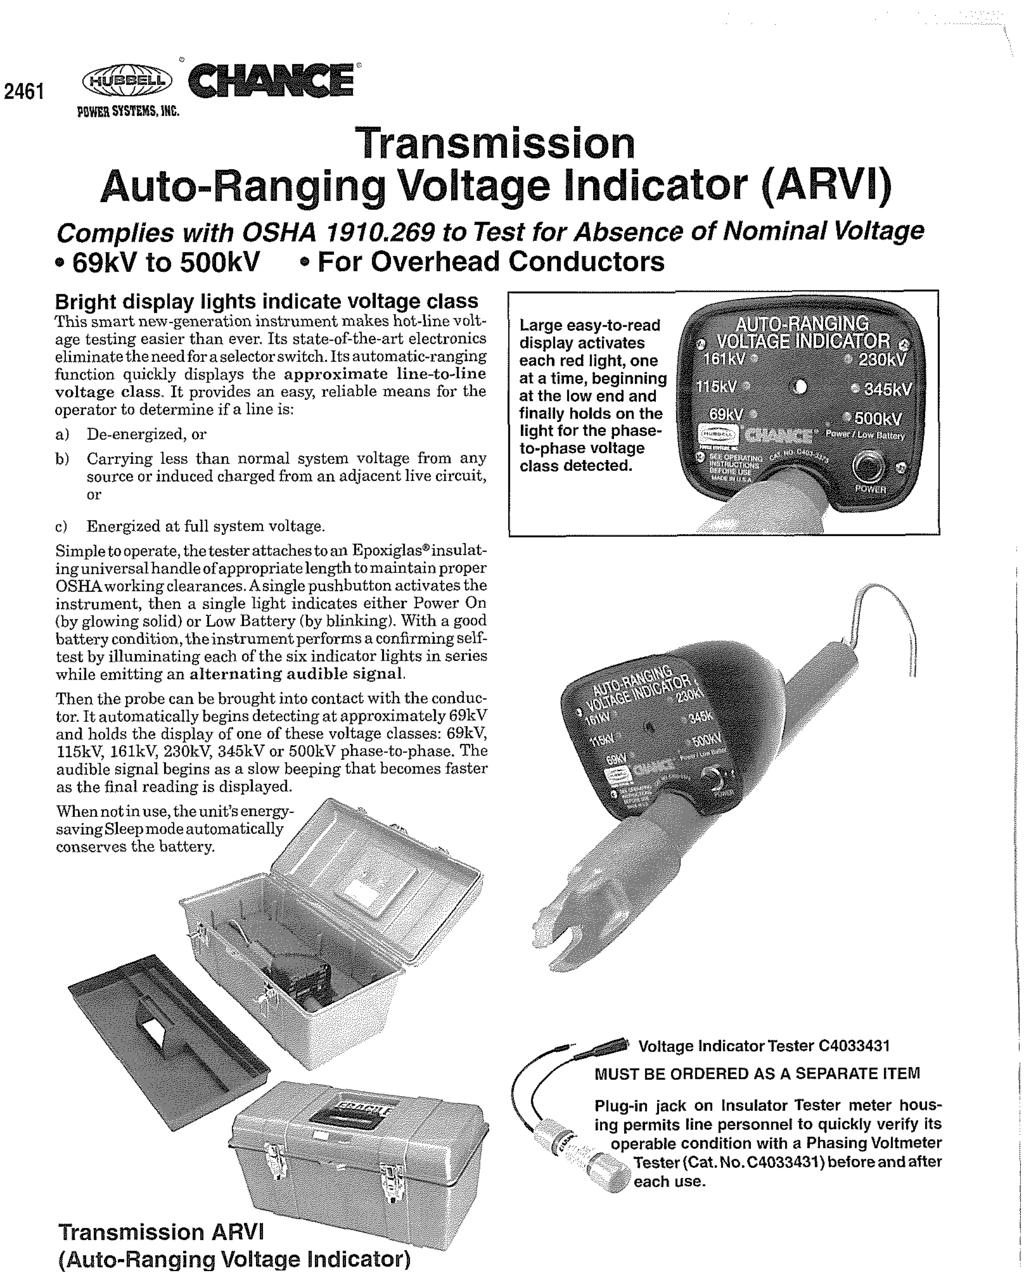 PQWER SYSTEMS. INC. Auto-Ranging Voltage Indicator (ARVI) Complies with OSHA 1910.